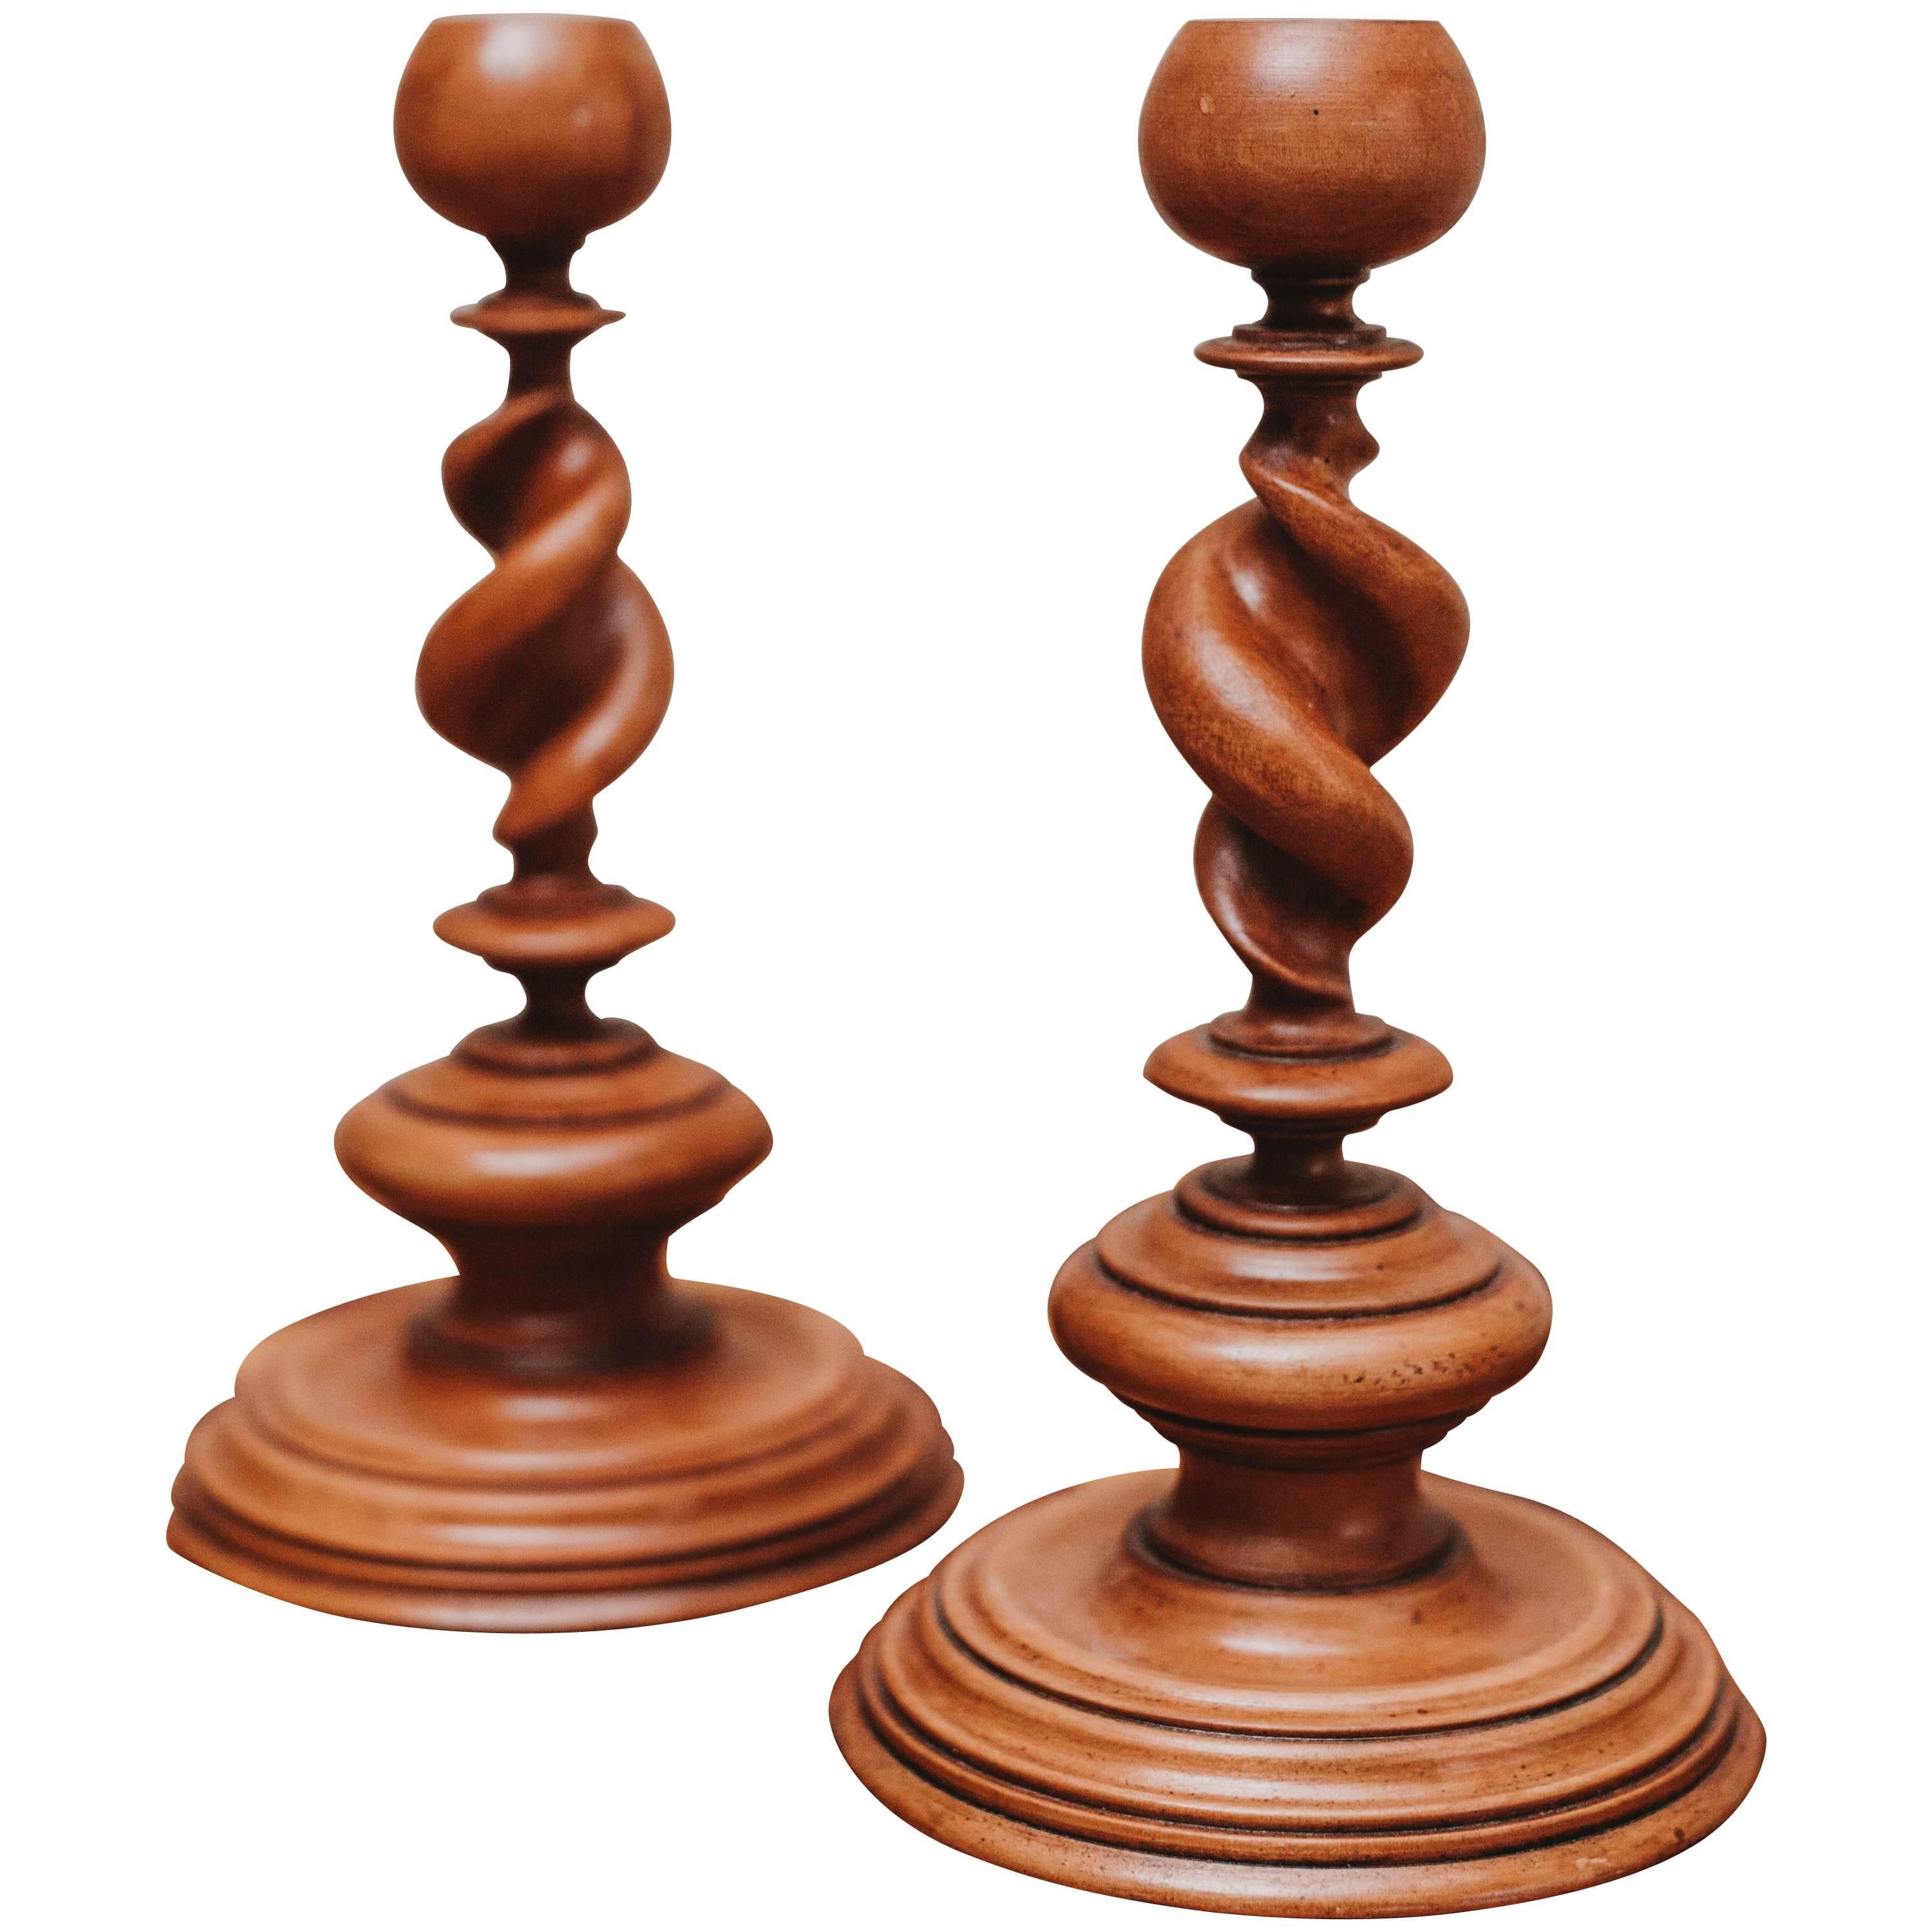 19th Century Palmwood Pair of Twisted Candlesticks